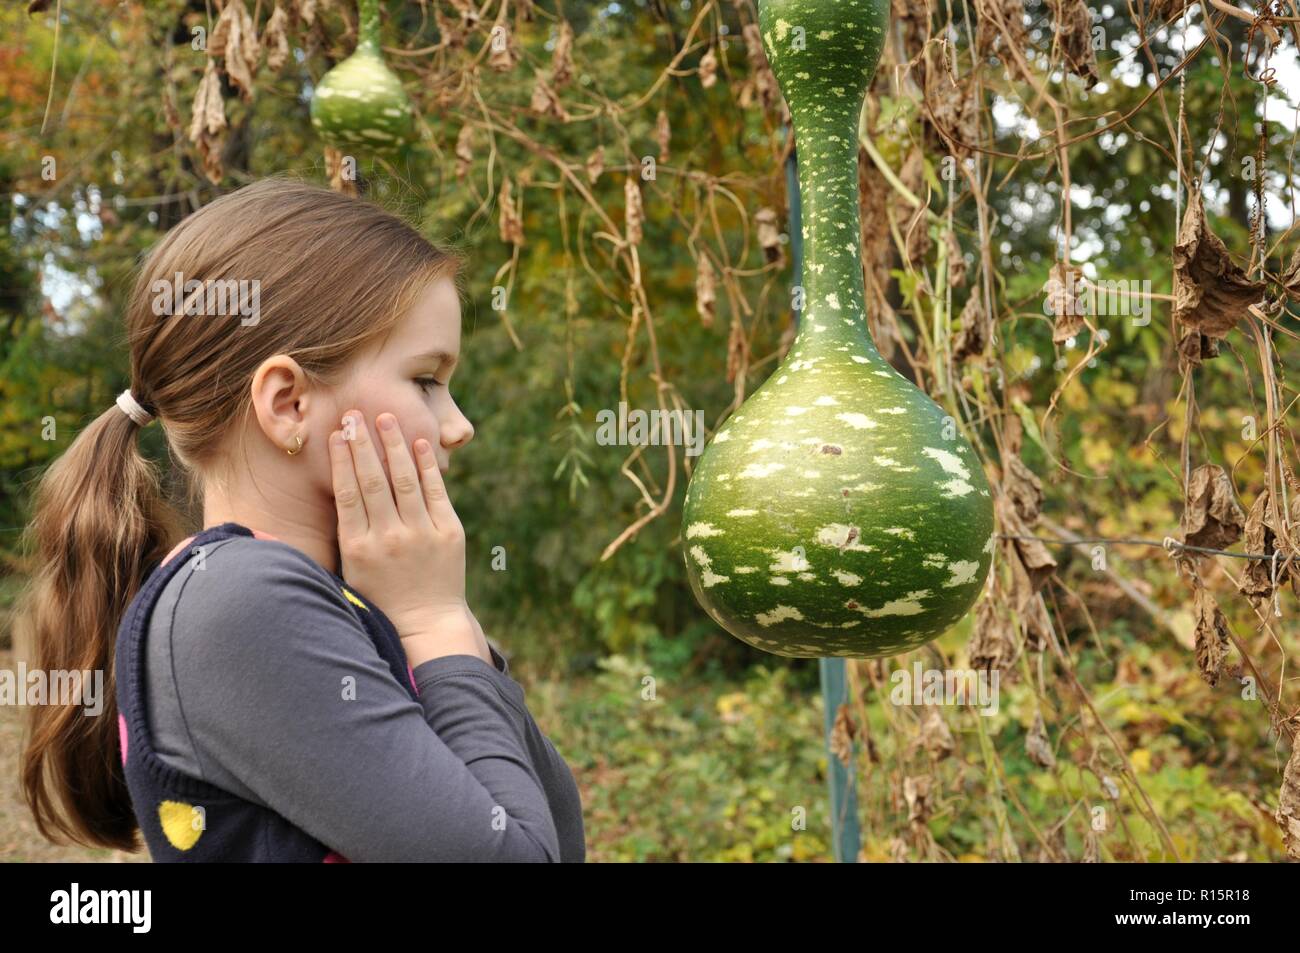 Caucasian 8 years old child, girl, happy in the park, looking at a big bottle gourd and marveling Stock Photo